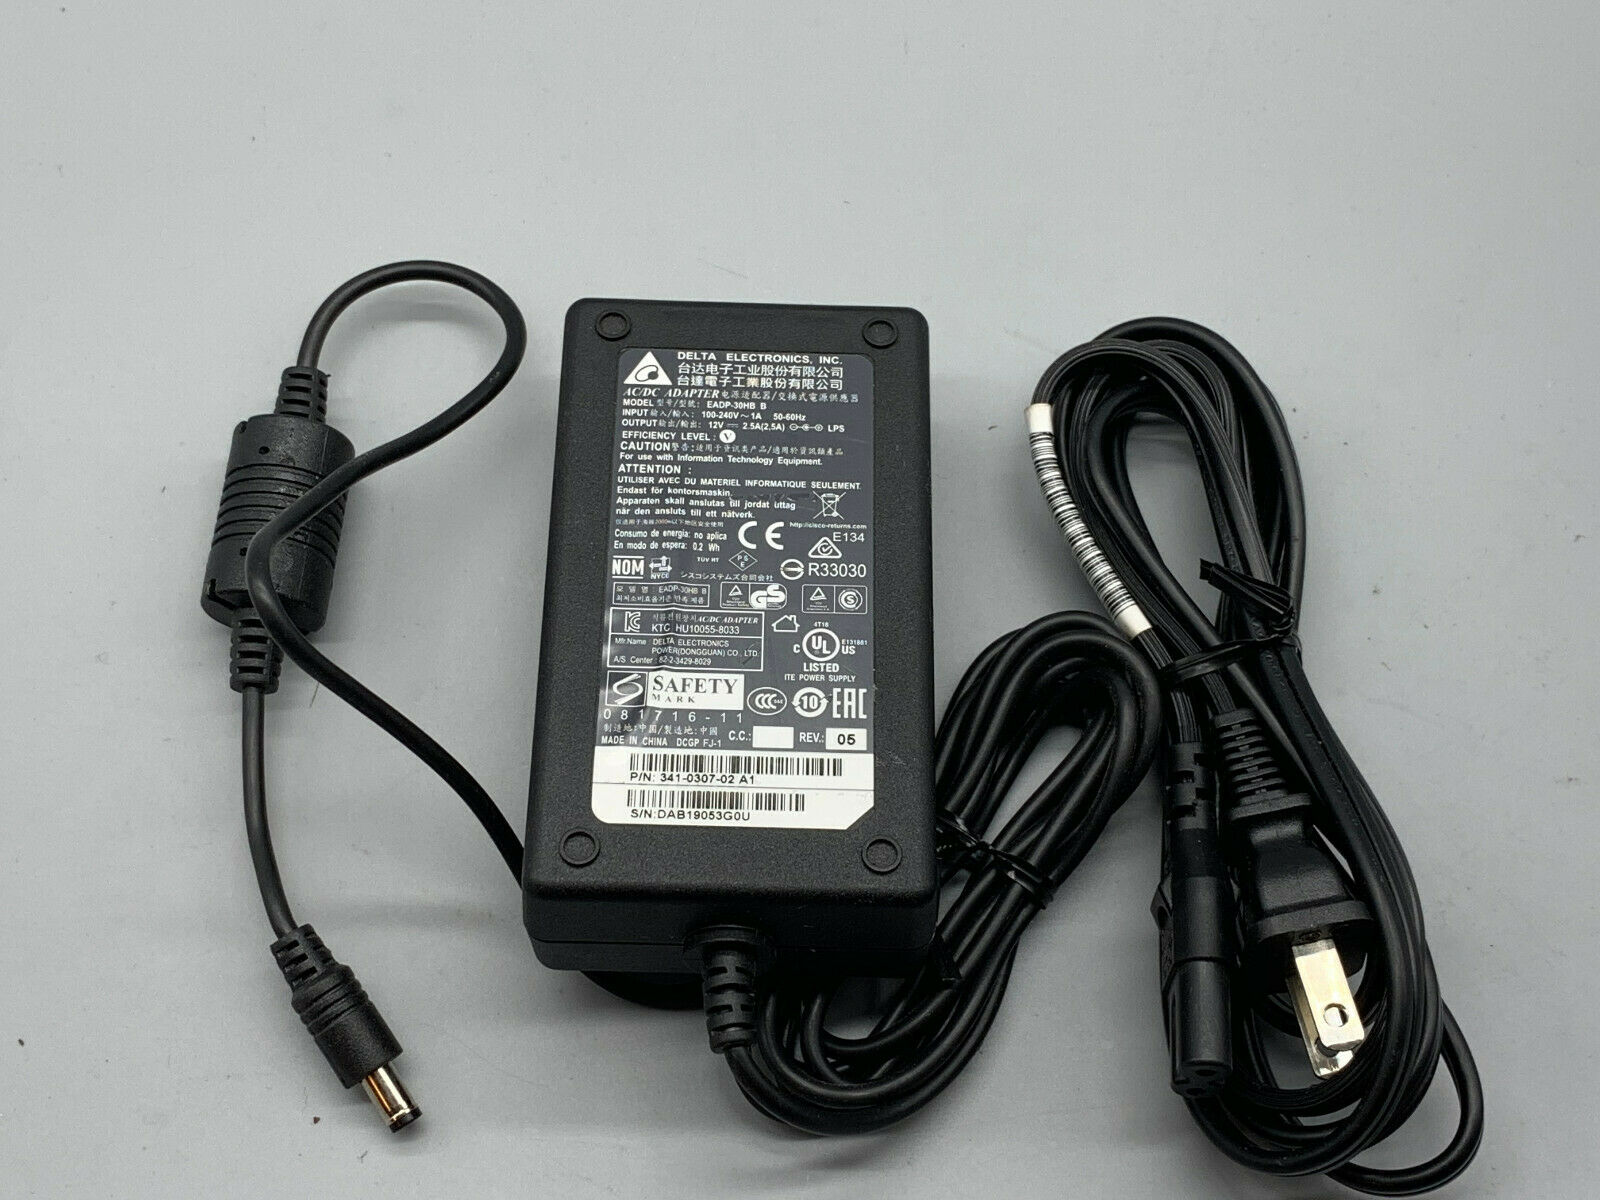 Brand new DELTA ELECTRONICS EADP-30HB B 12V 2.5A AC/DC POWER SUPPLY ADAPTER